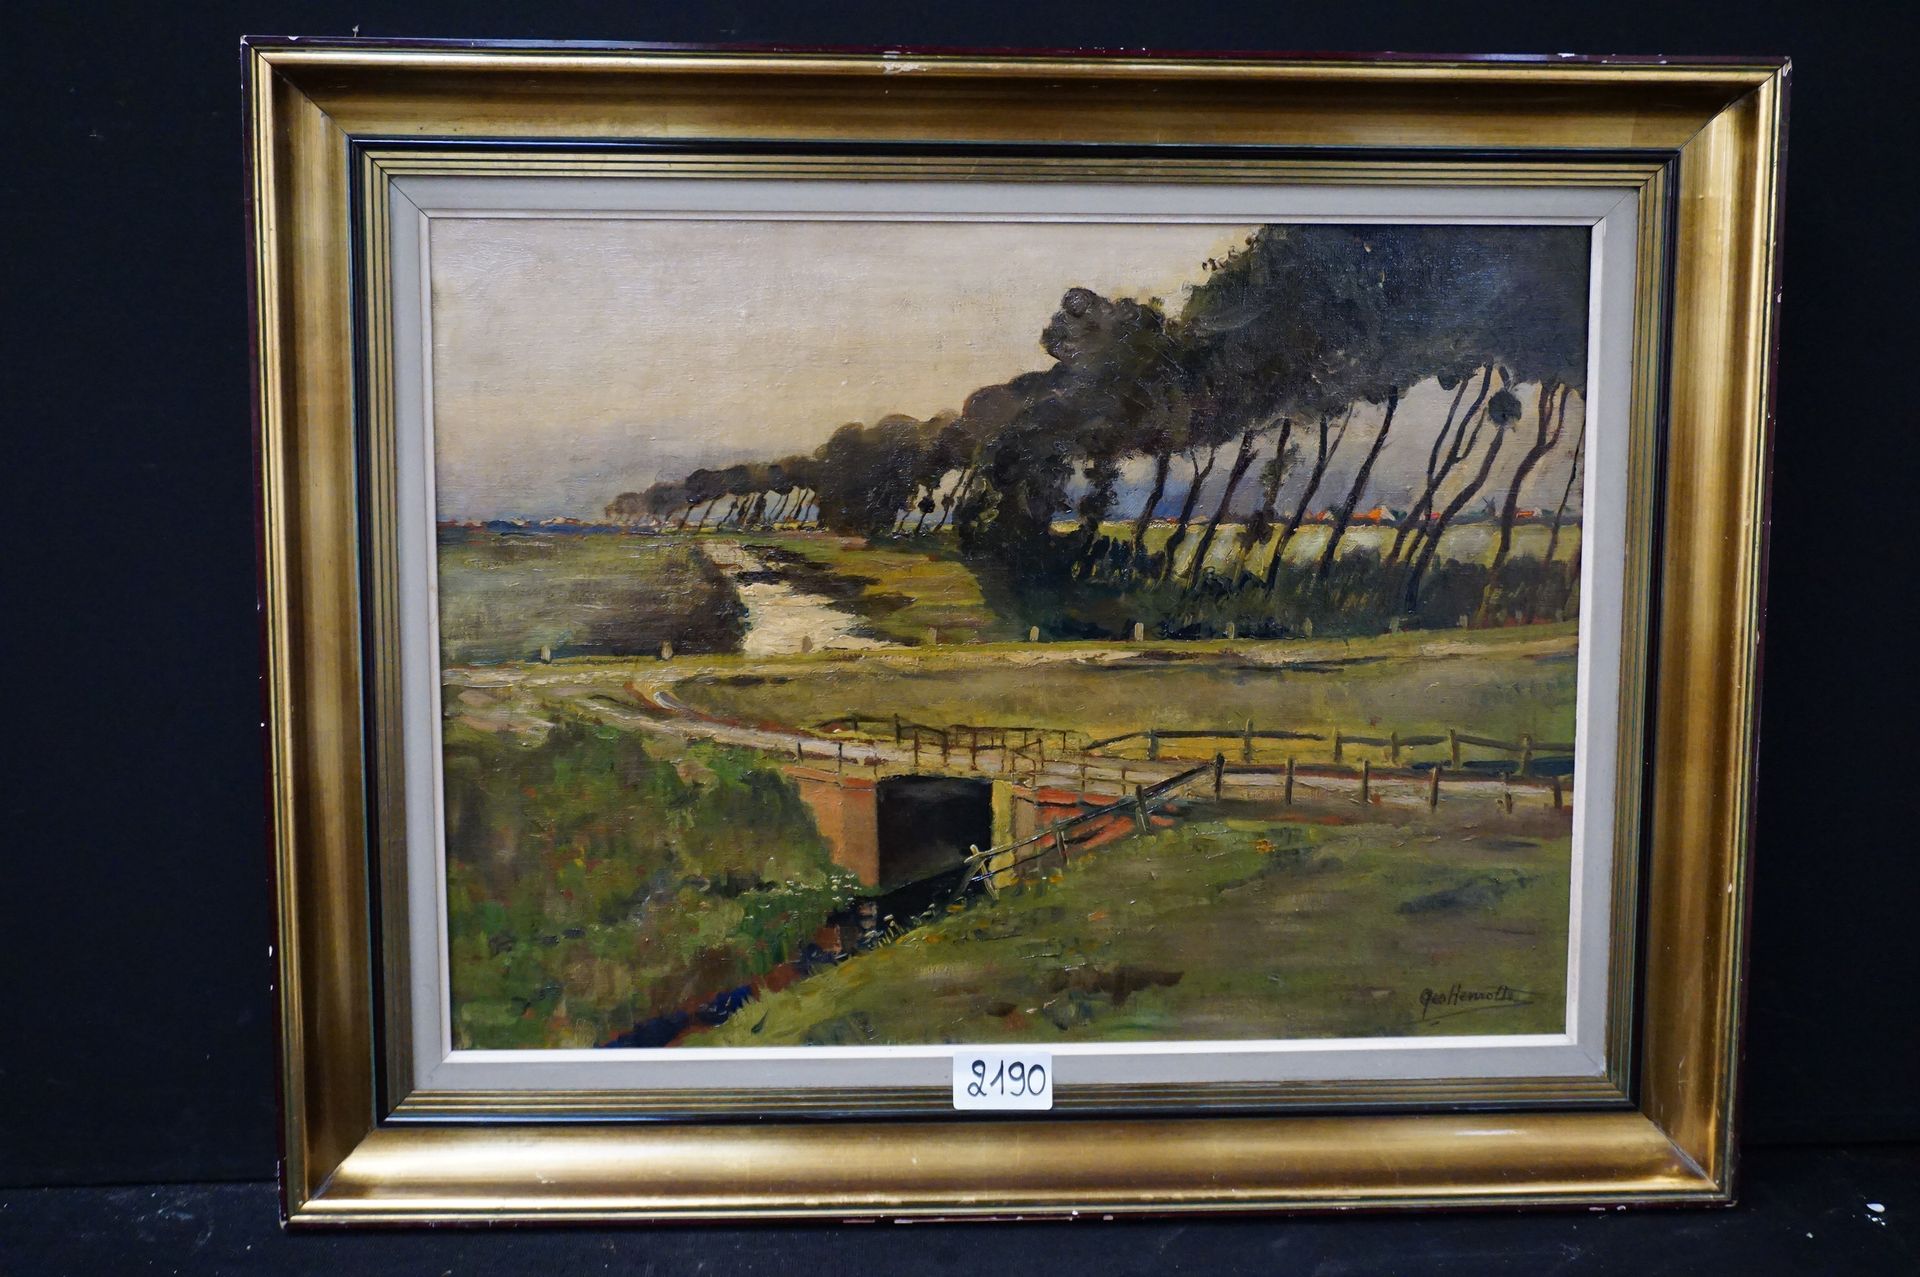 GEO HENROTTE (1905 - 1992) "Landscape with small bridge" - Oil on canvas - Signe&hellip;